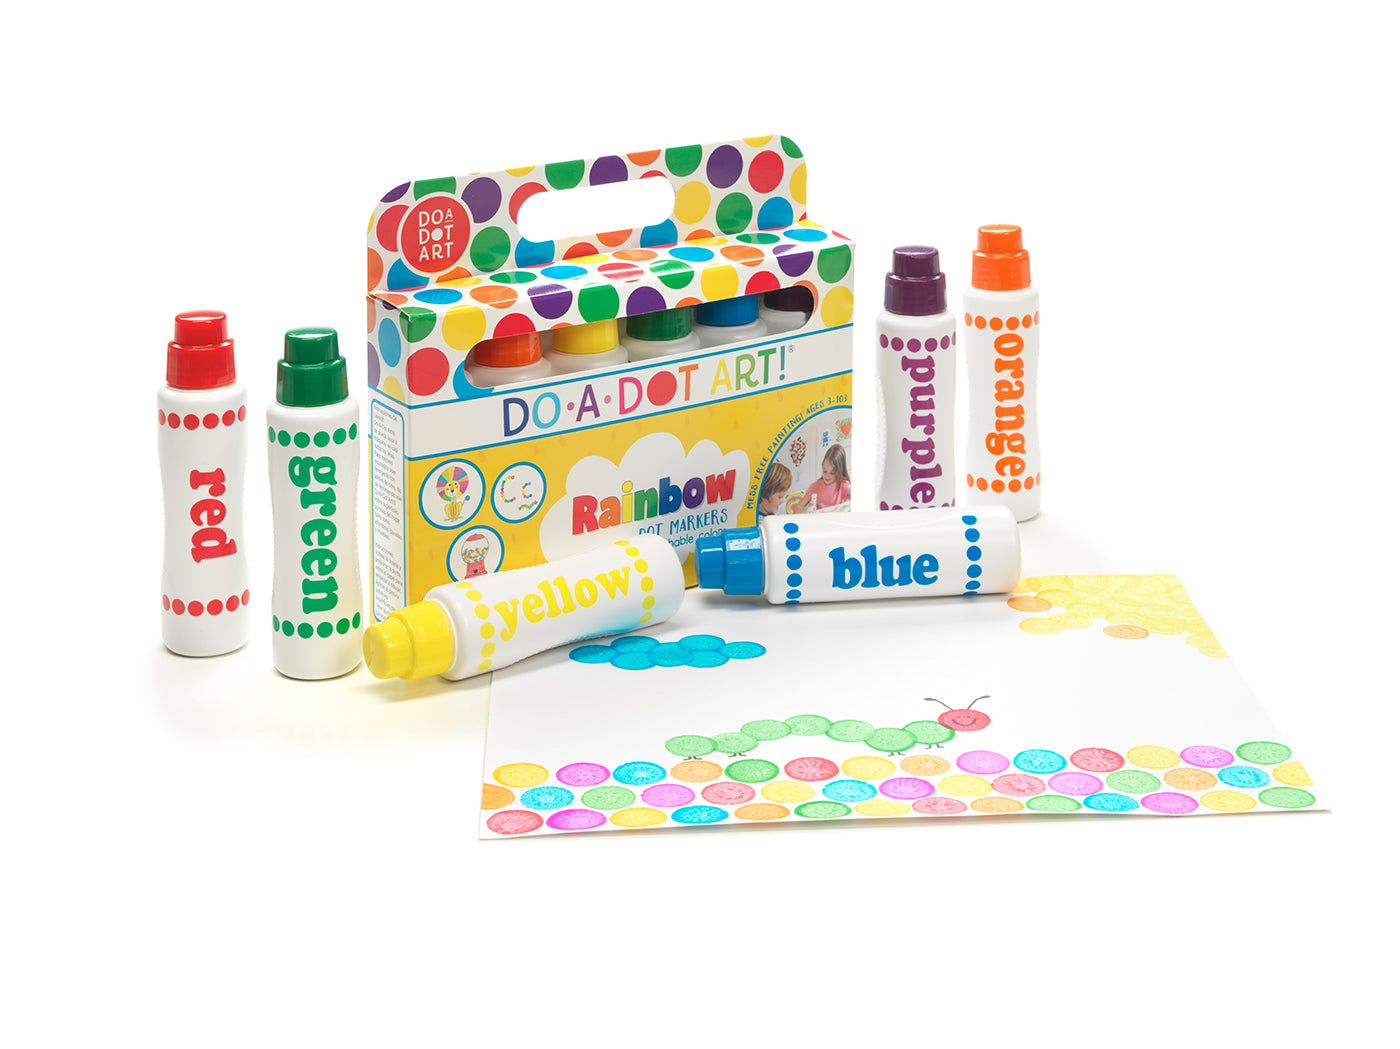 Do-A-Dot Rainbow 6 Pack Dot Markers - DAD101